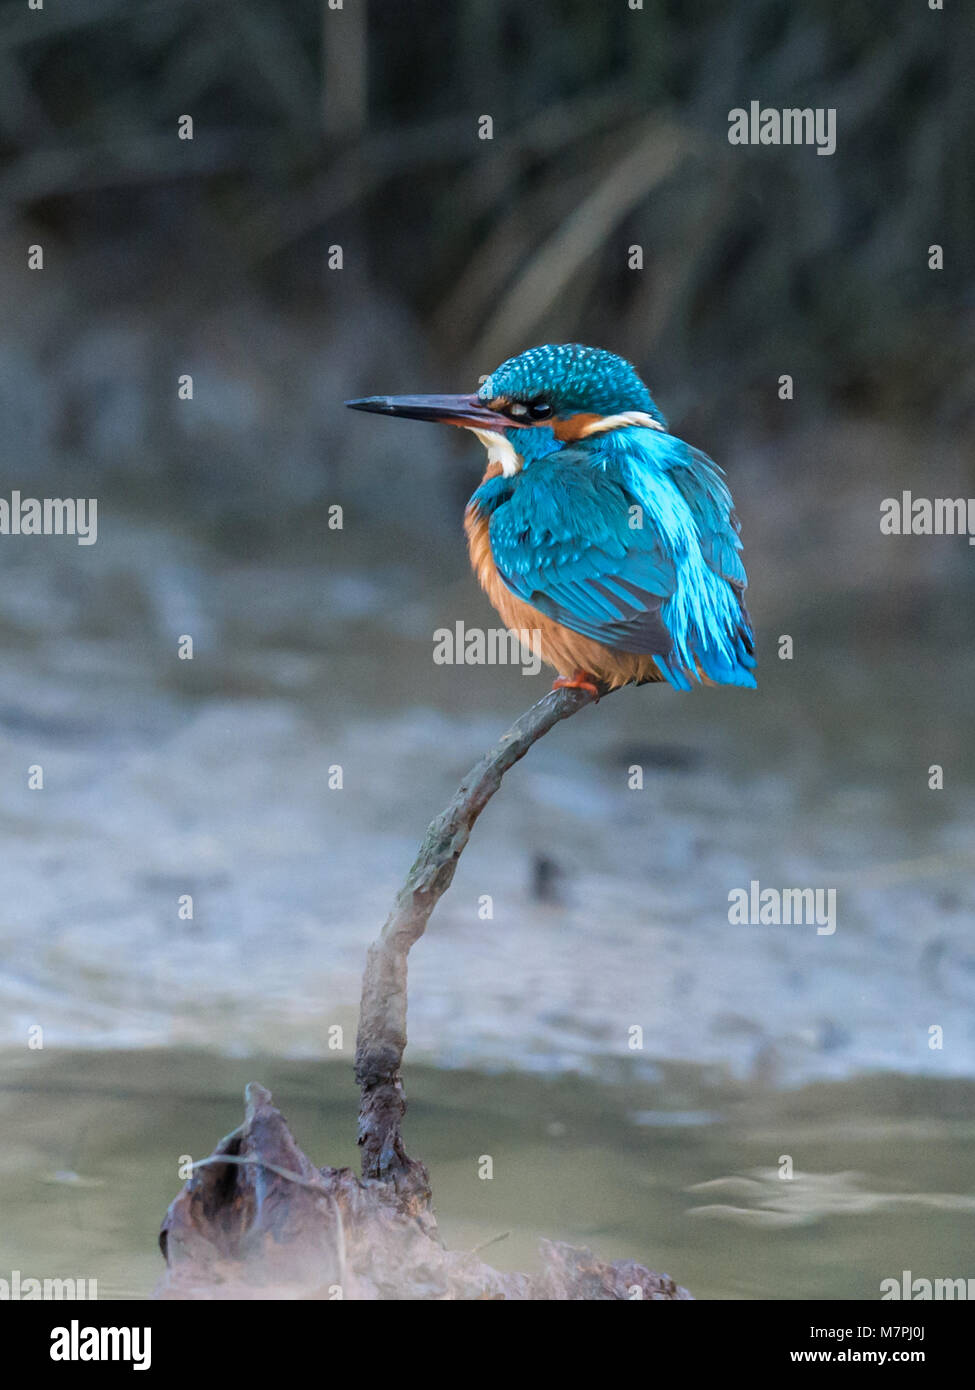 Kingfisher (Alcedinidae) by the river bank portrait. Stock Photo